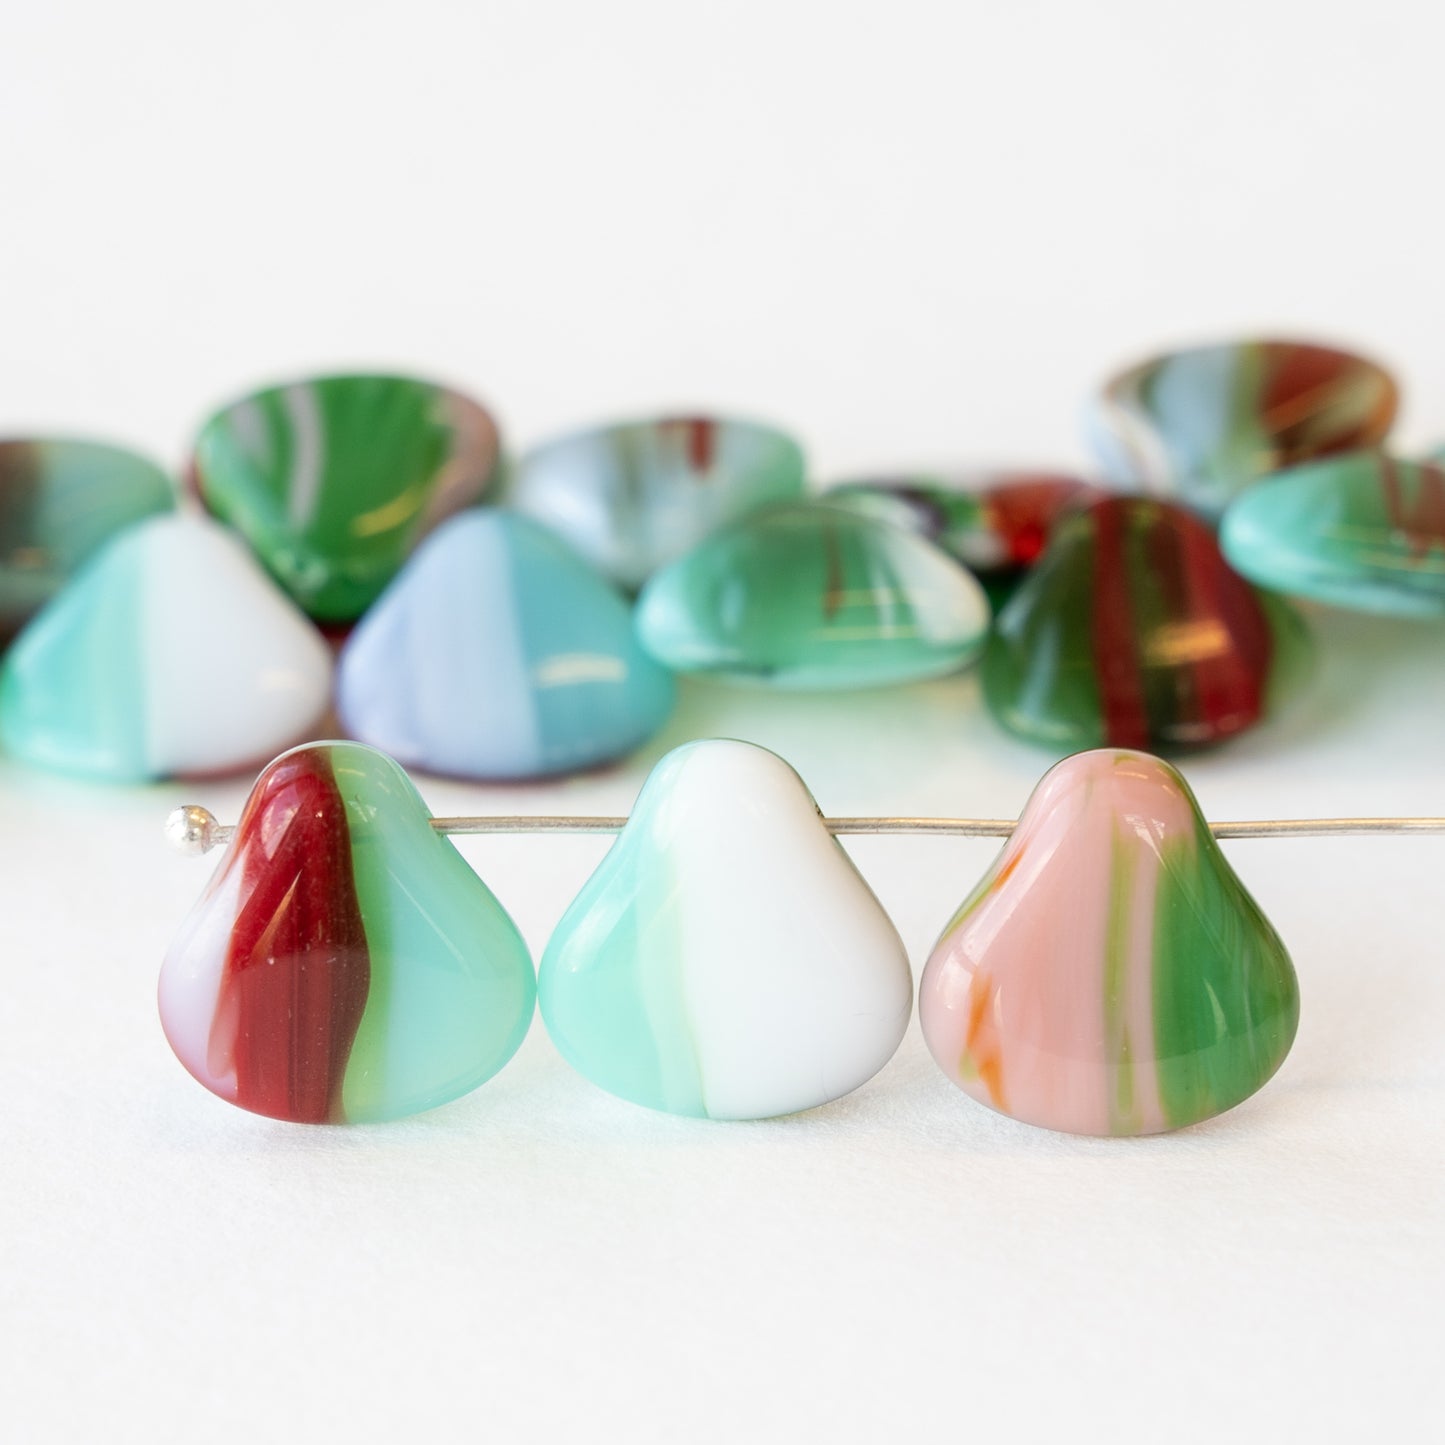 16mm Glass Triangle Drop Beads - Mixed Colors - 12 Beads